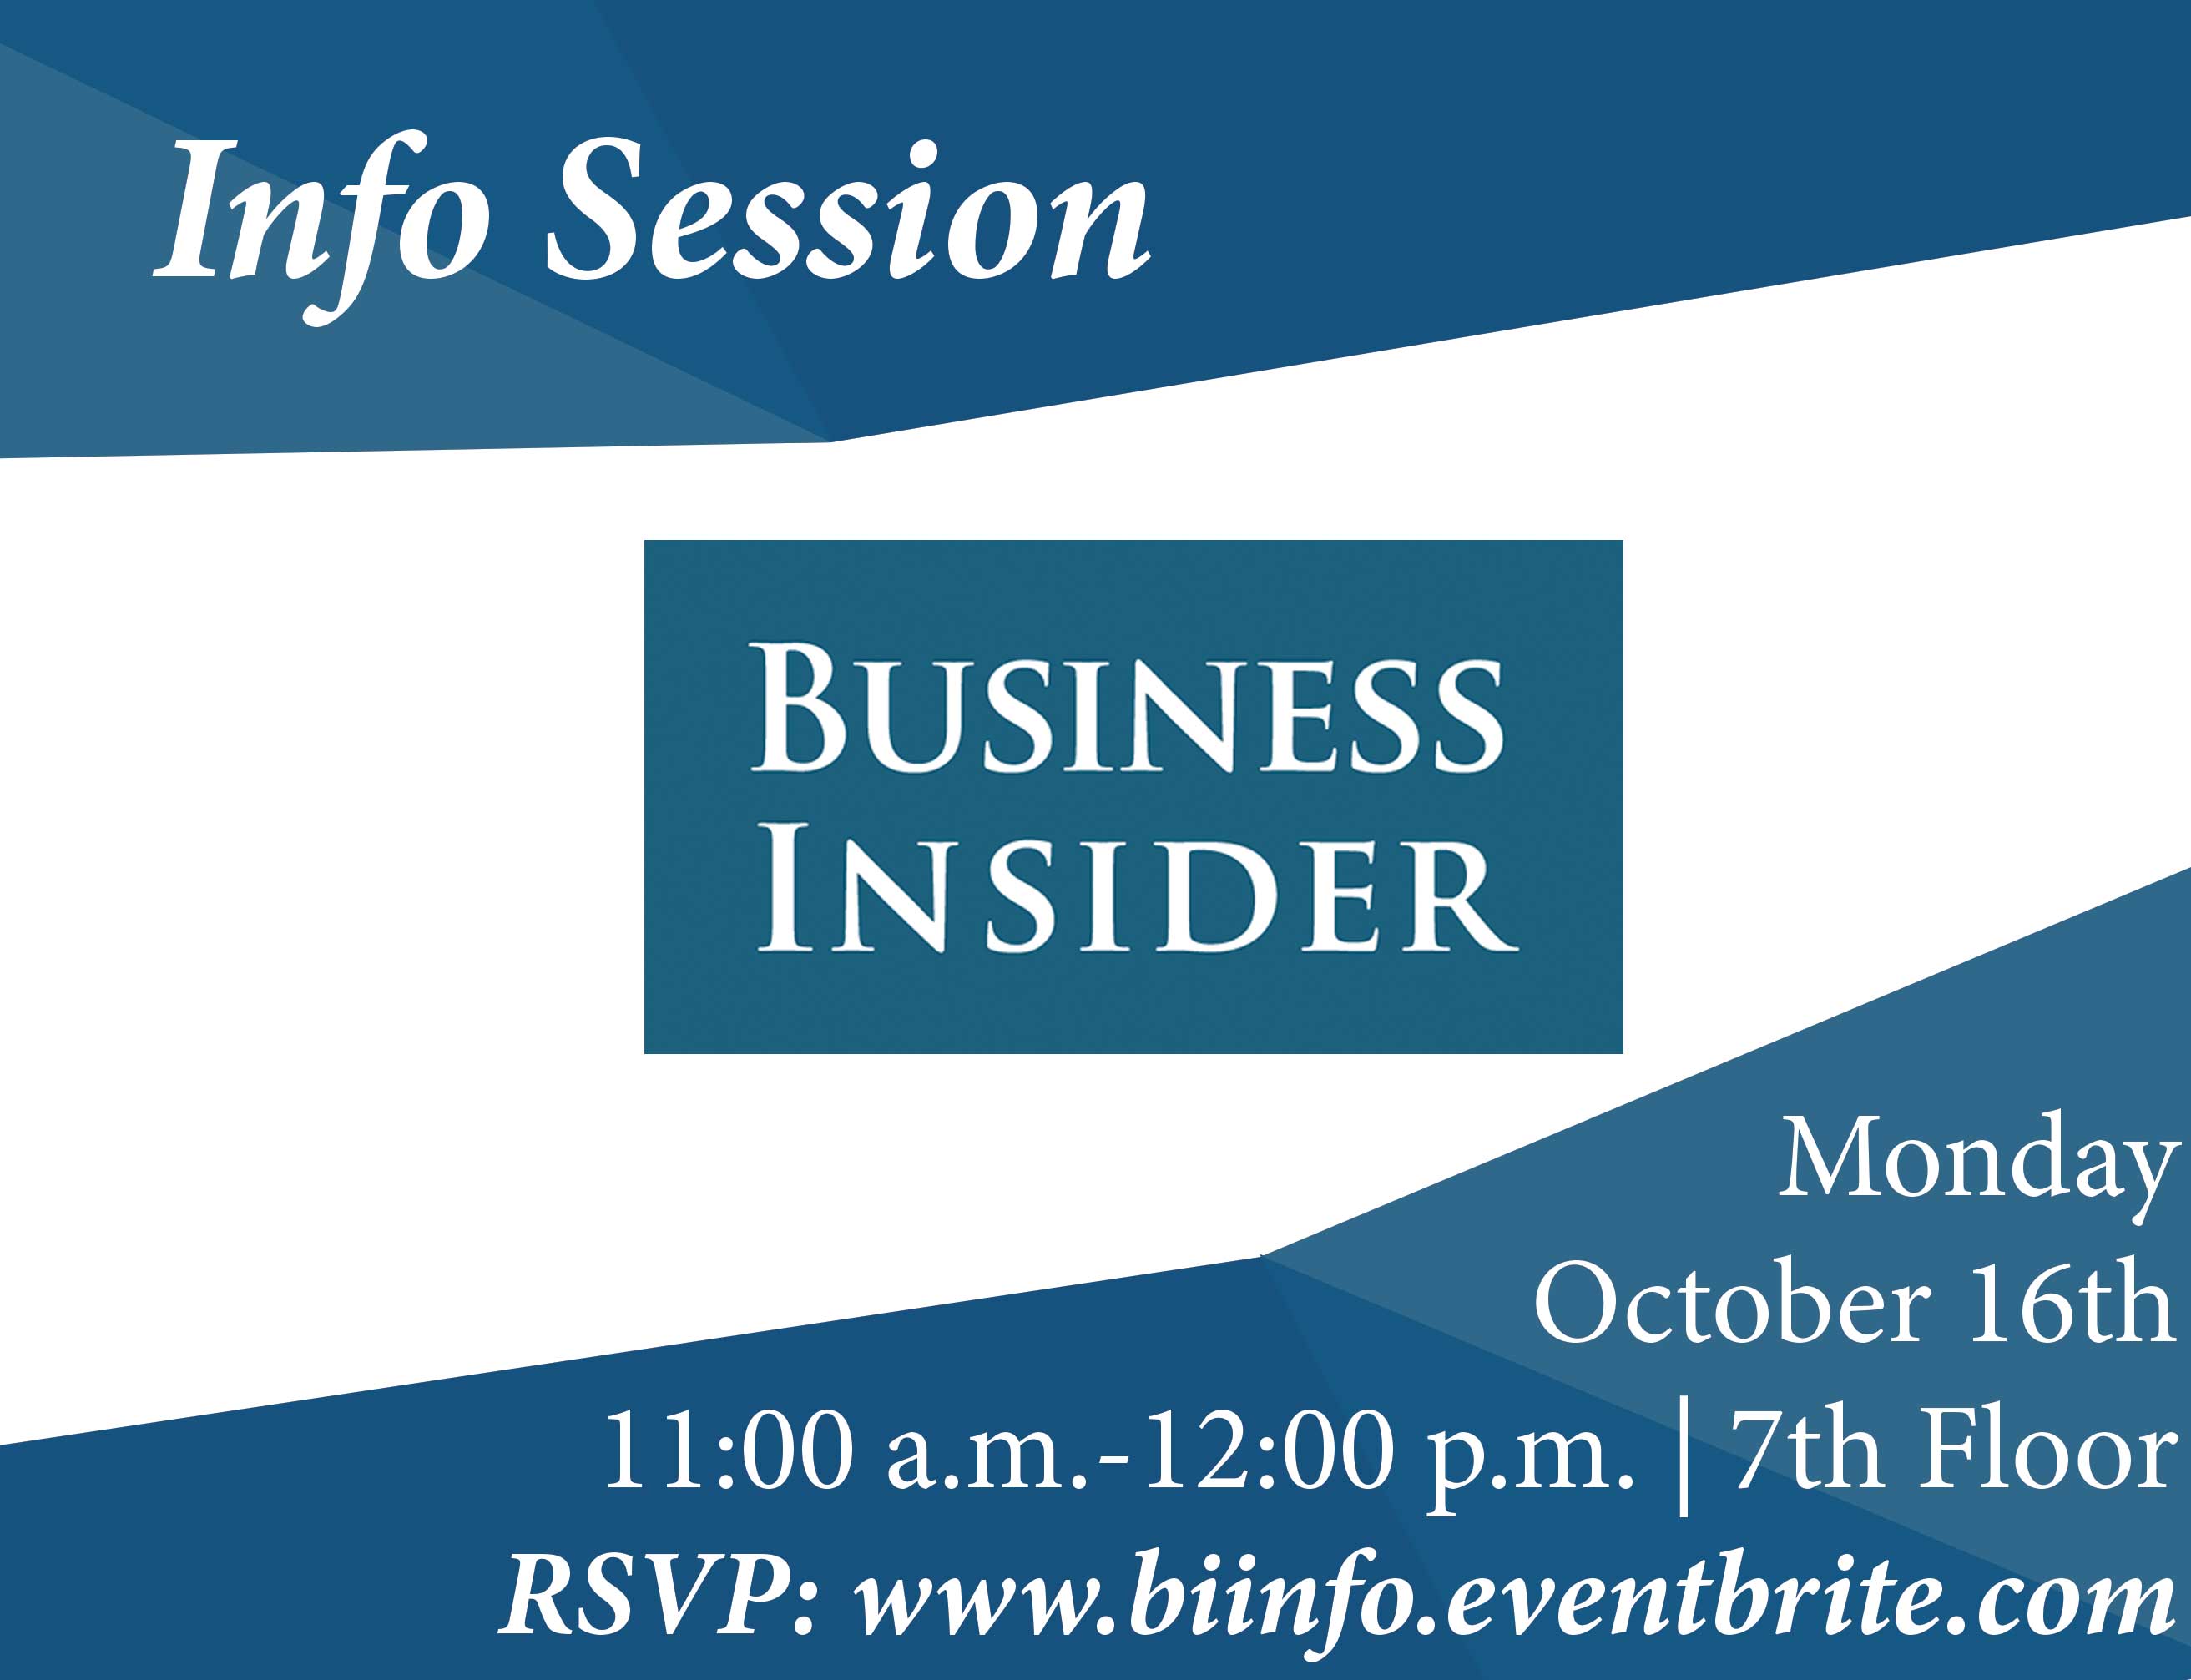 Info Session - Business Insider - Event Poster October 16th 2017